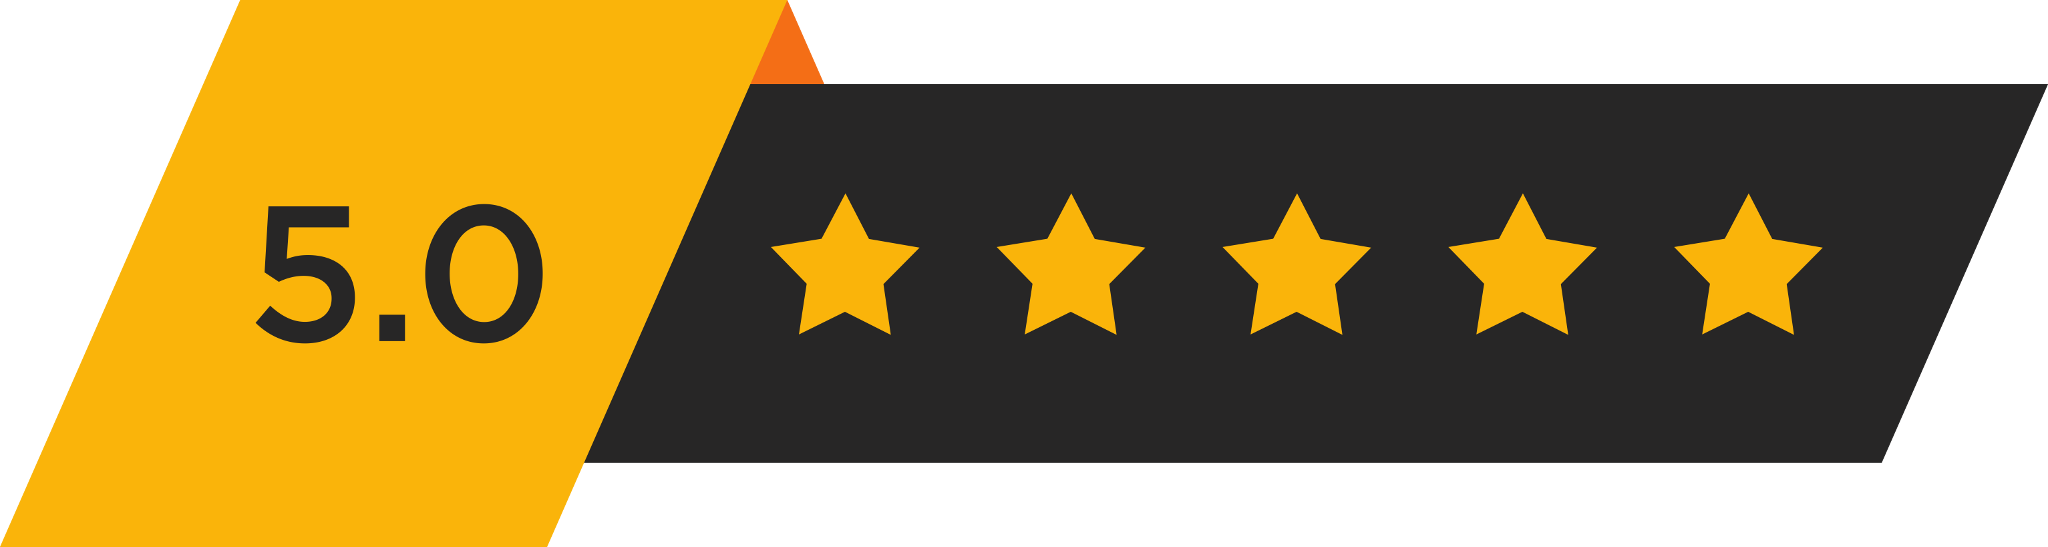 5 Star Rating Png - Free Transparent PNG Download - PNGkey